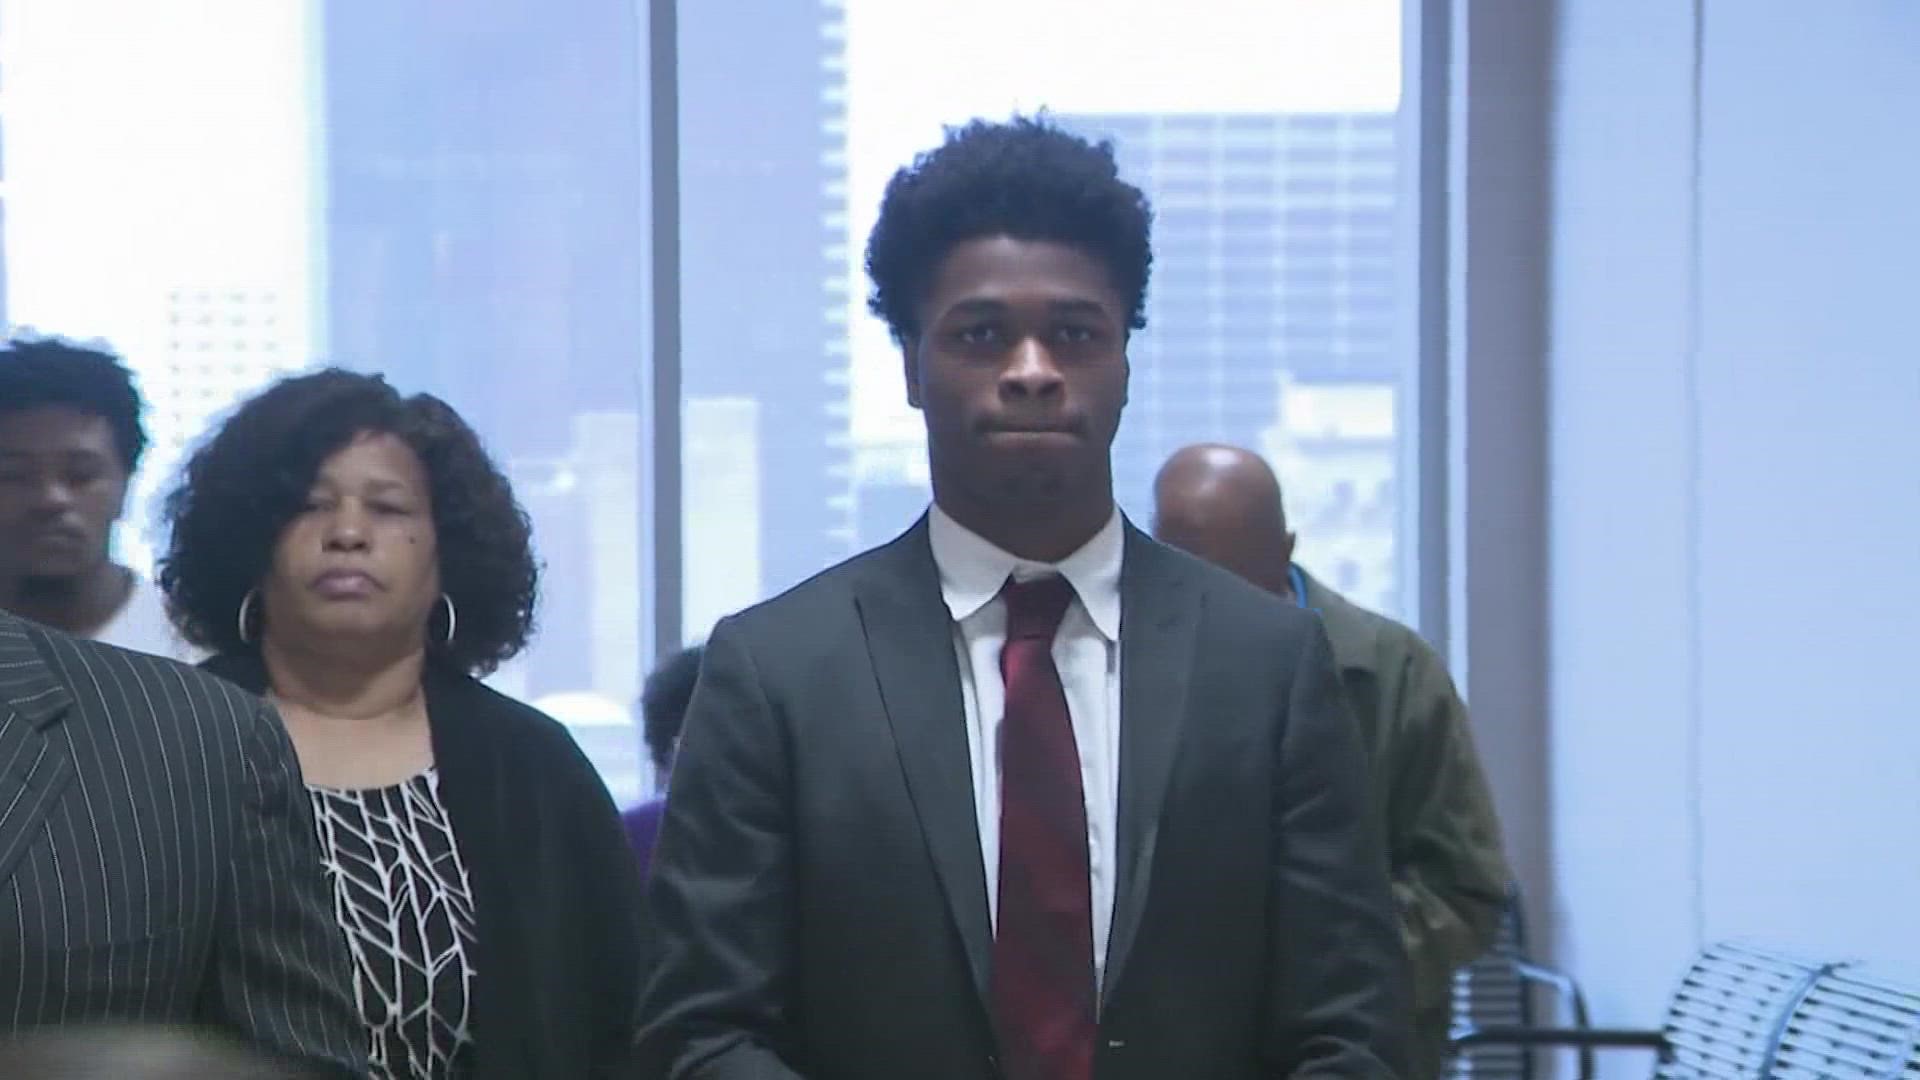 Armstrong was 16 when prosecutors said he shot and killed his parents while they slept in their southwest Houston home in 2016.